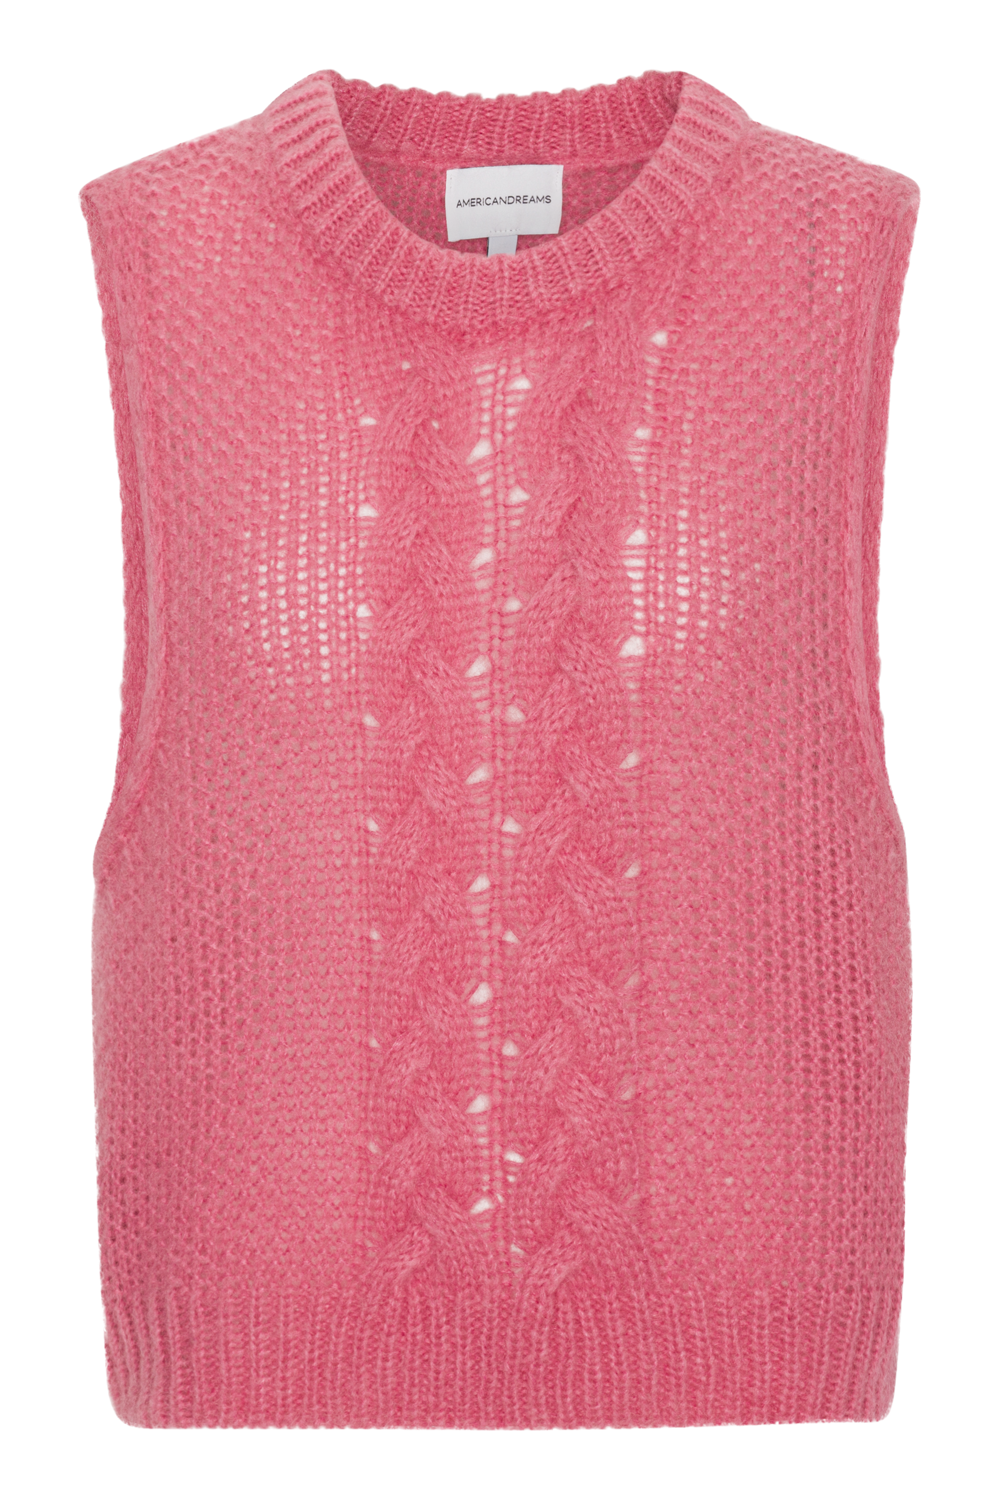 Angie Cable Knit Vest Pink